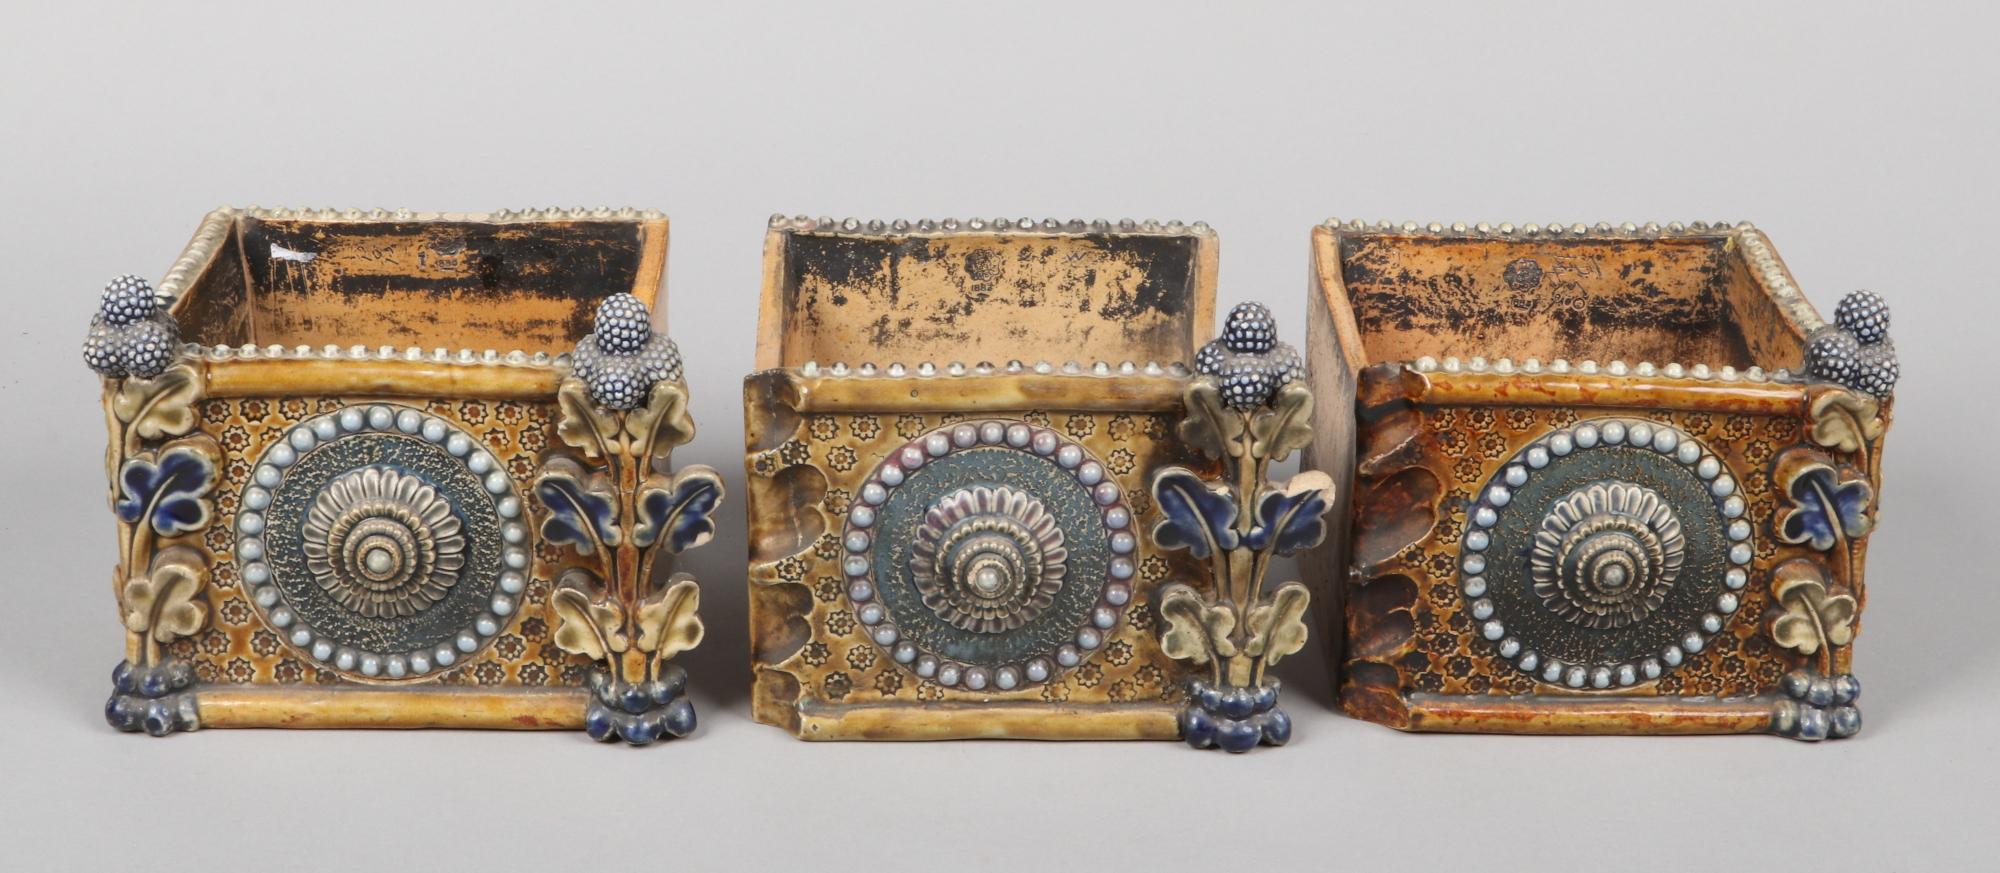 Royal Doulton. Lambeth.
A rare Aesthetic Movement three-section window sill flower planter, with stylized floral beaded roundels to the front and incised floral roundels to each end, all with incised petite flower heads and foliate and berry